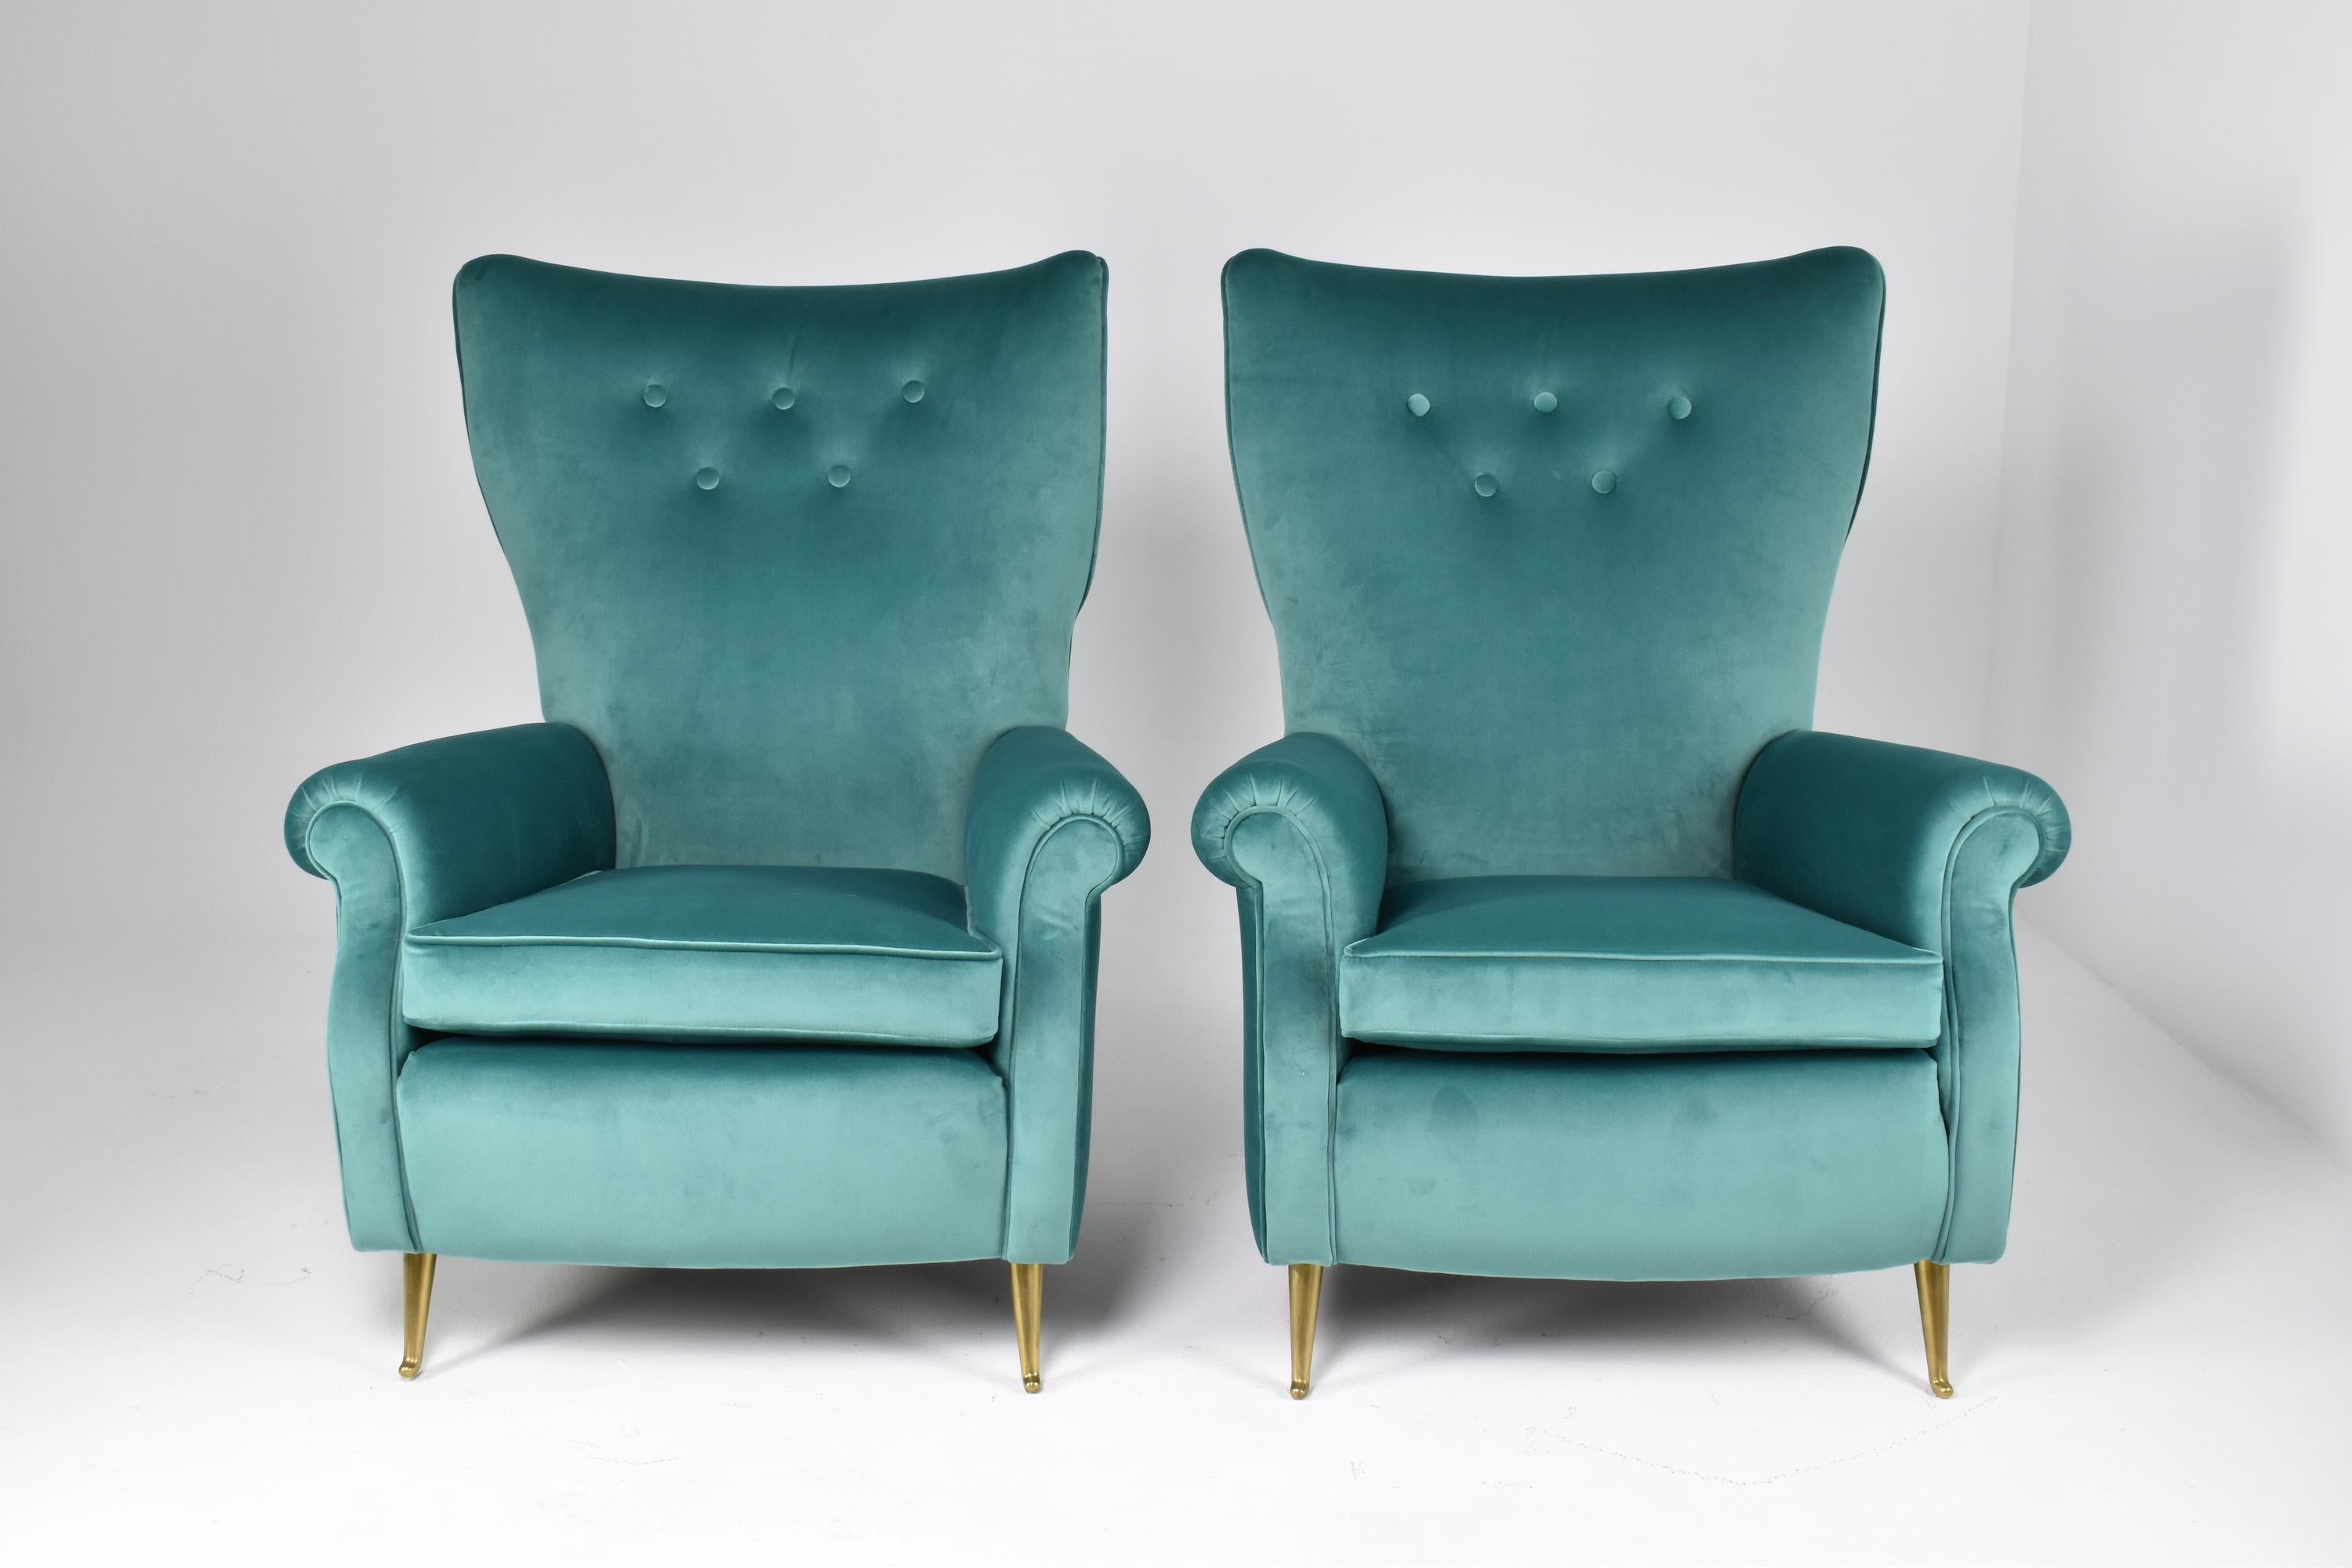 Italian Midcentury Armchairs by ISA Bergamo, Set of Two, 1950s For Sale 2